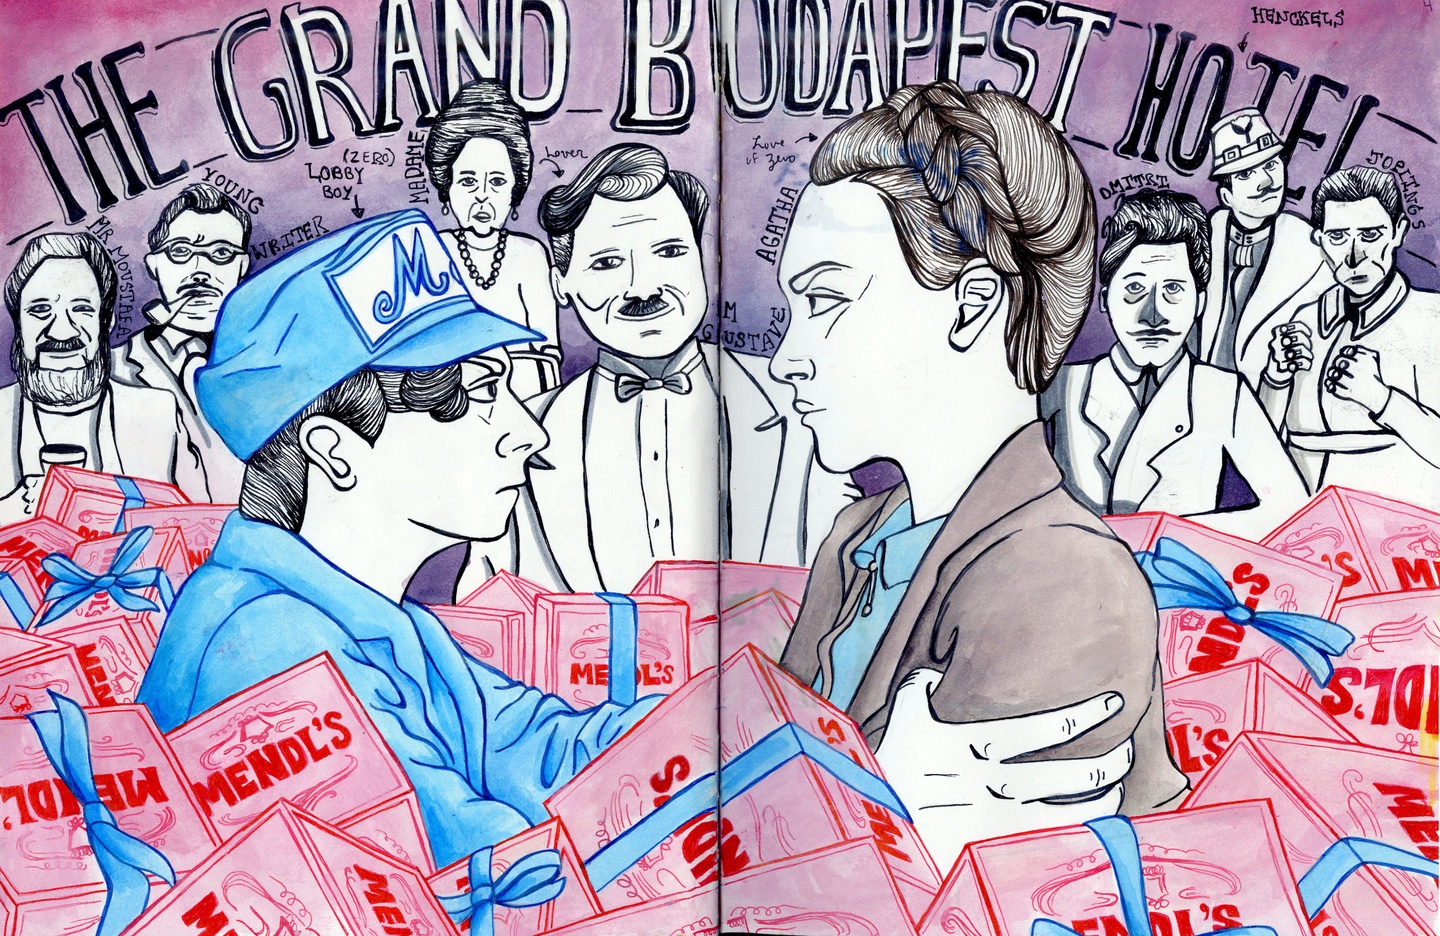 Open spread illustration in sketchbook depicts black and white figures: one figure grasping another figure by the arms, both with stern looks to the other, other figures in the background with referenced text for names. Foreground figures are surrounded by jumbled pink boxes labeled Mendl's. Text in the background across the top reads The Grand Budapet Hotel.